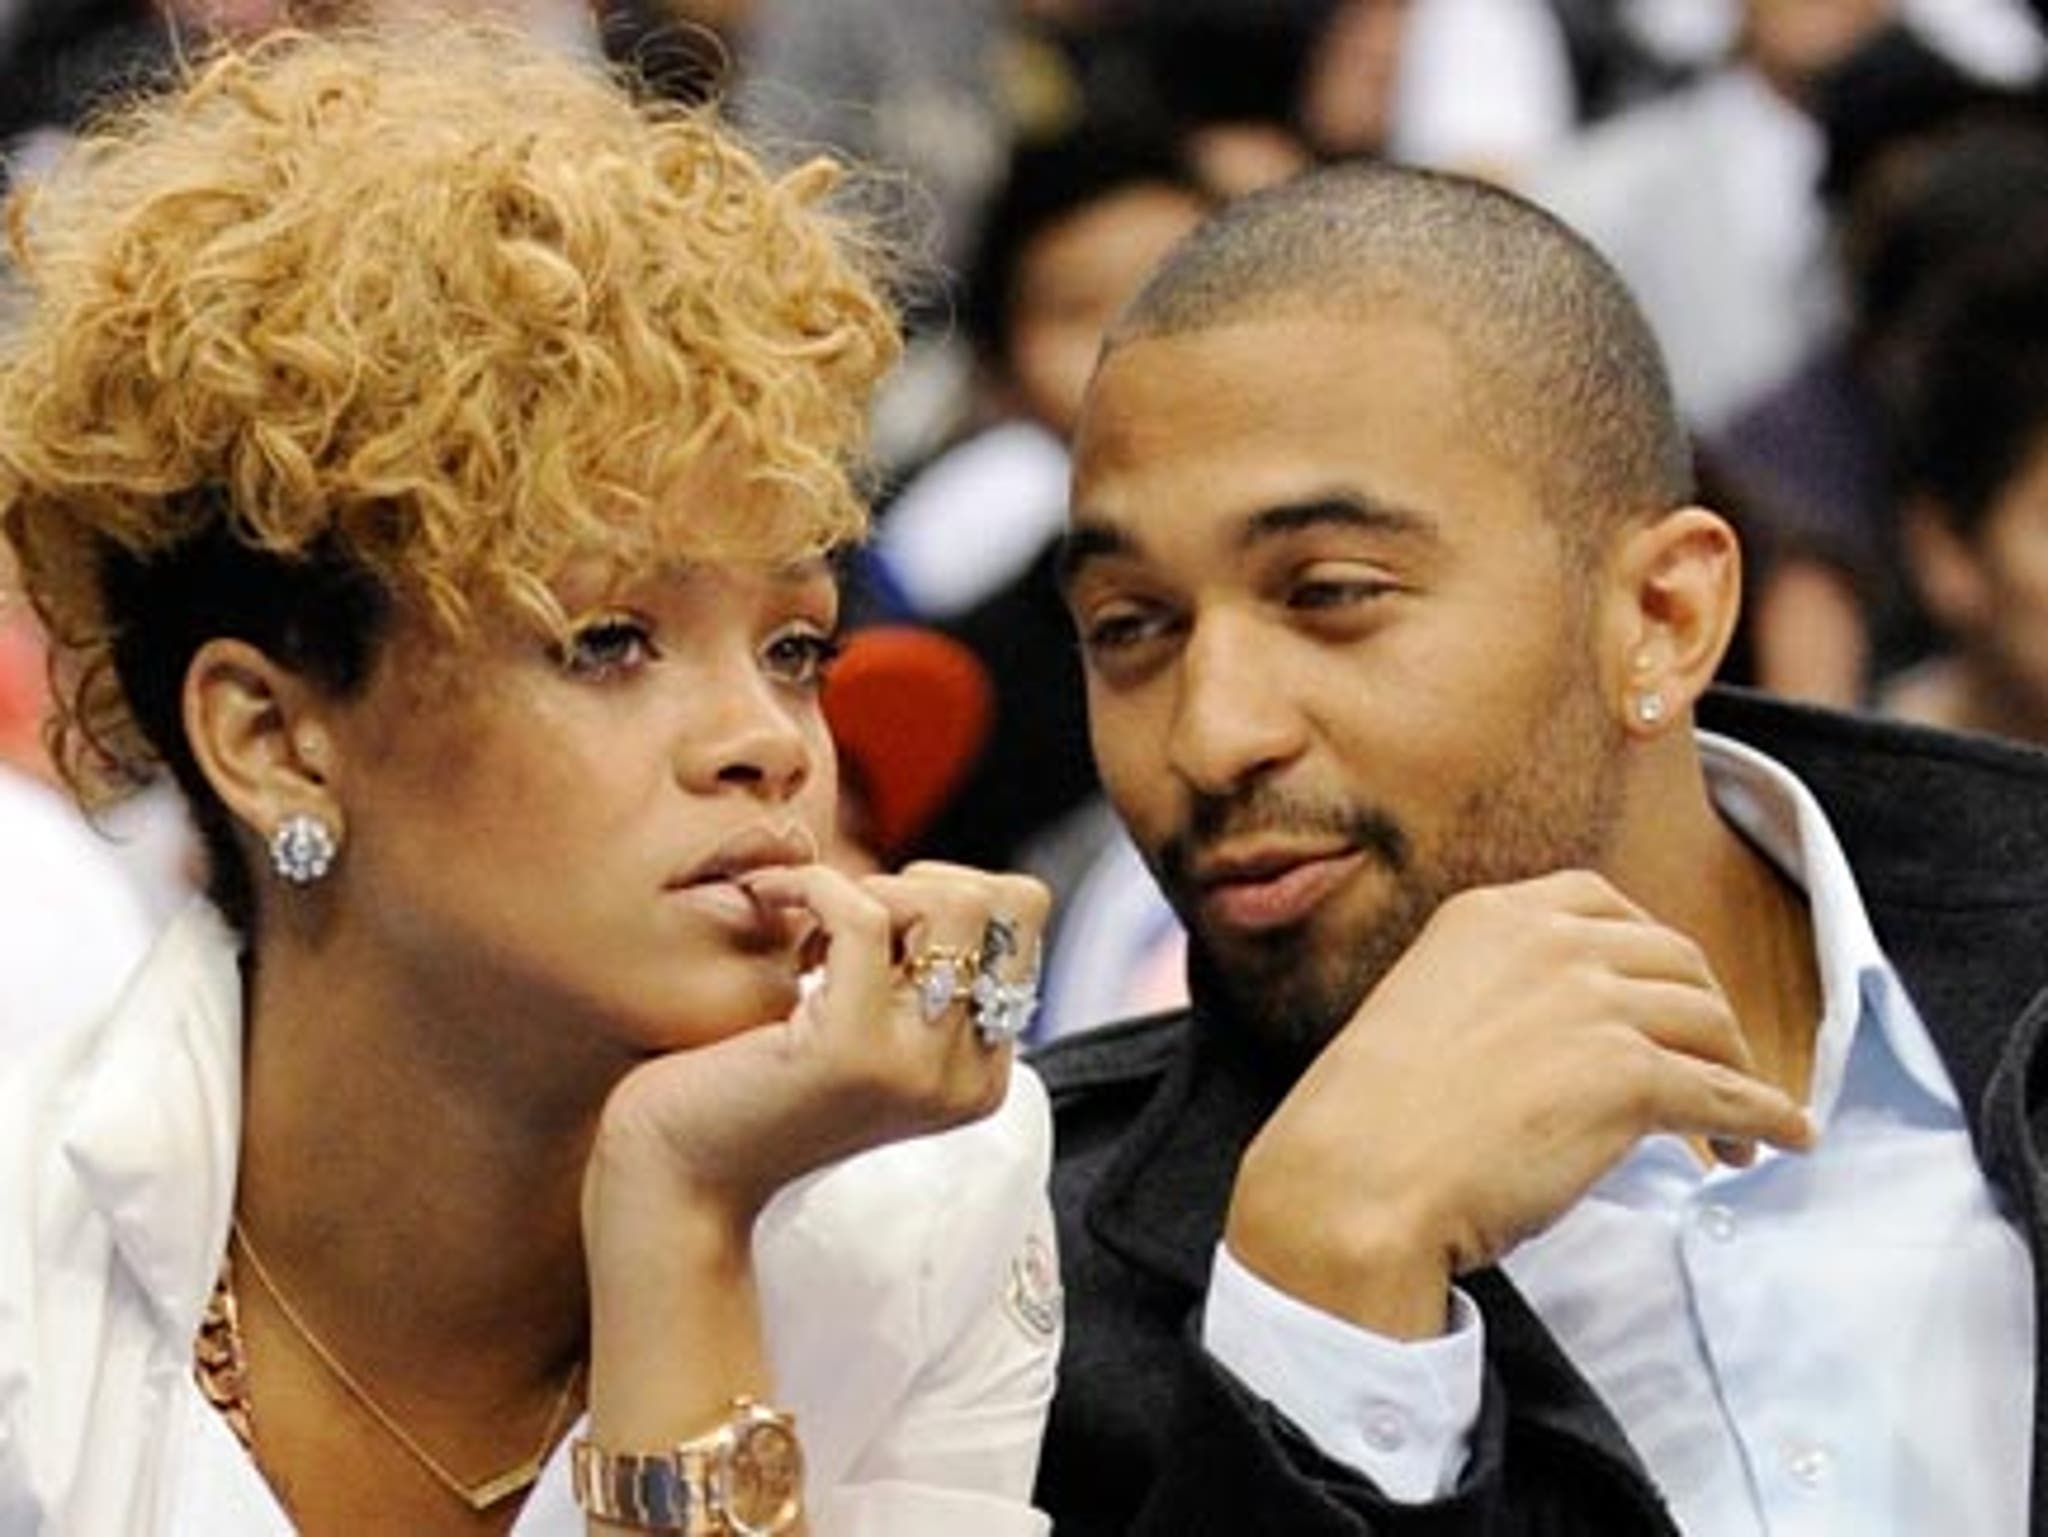 Matt Kemp Goes With Rihanna to Get Inked in NYC